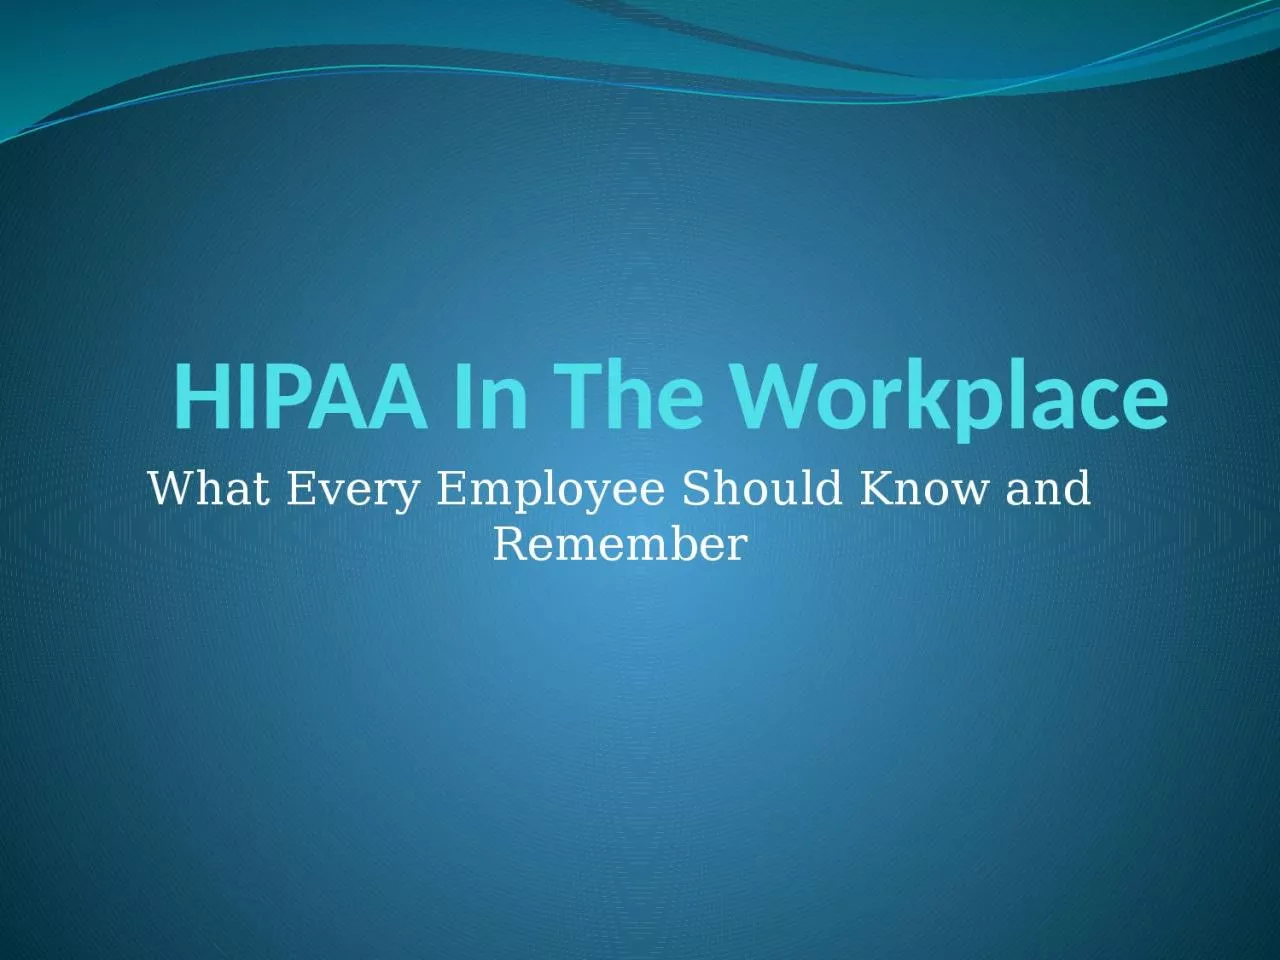 HIPAA In The Workplace What Every Employee Should Know and Remember